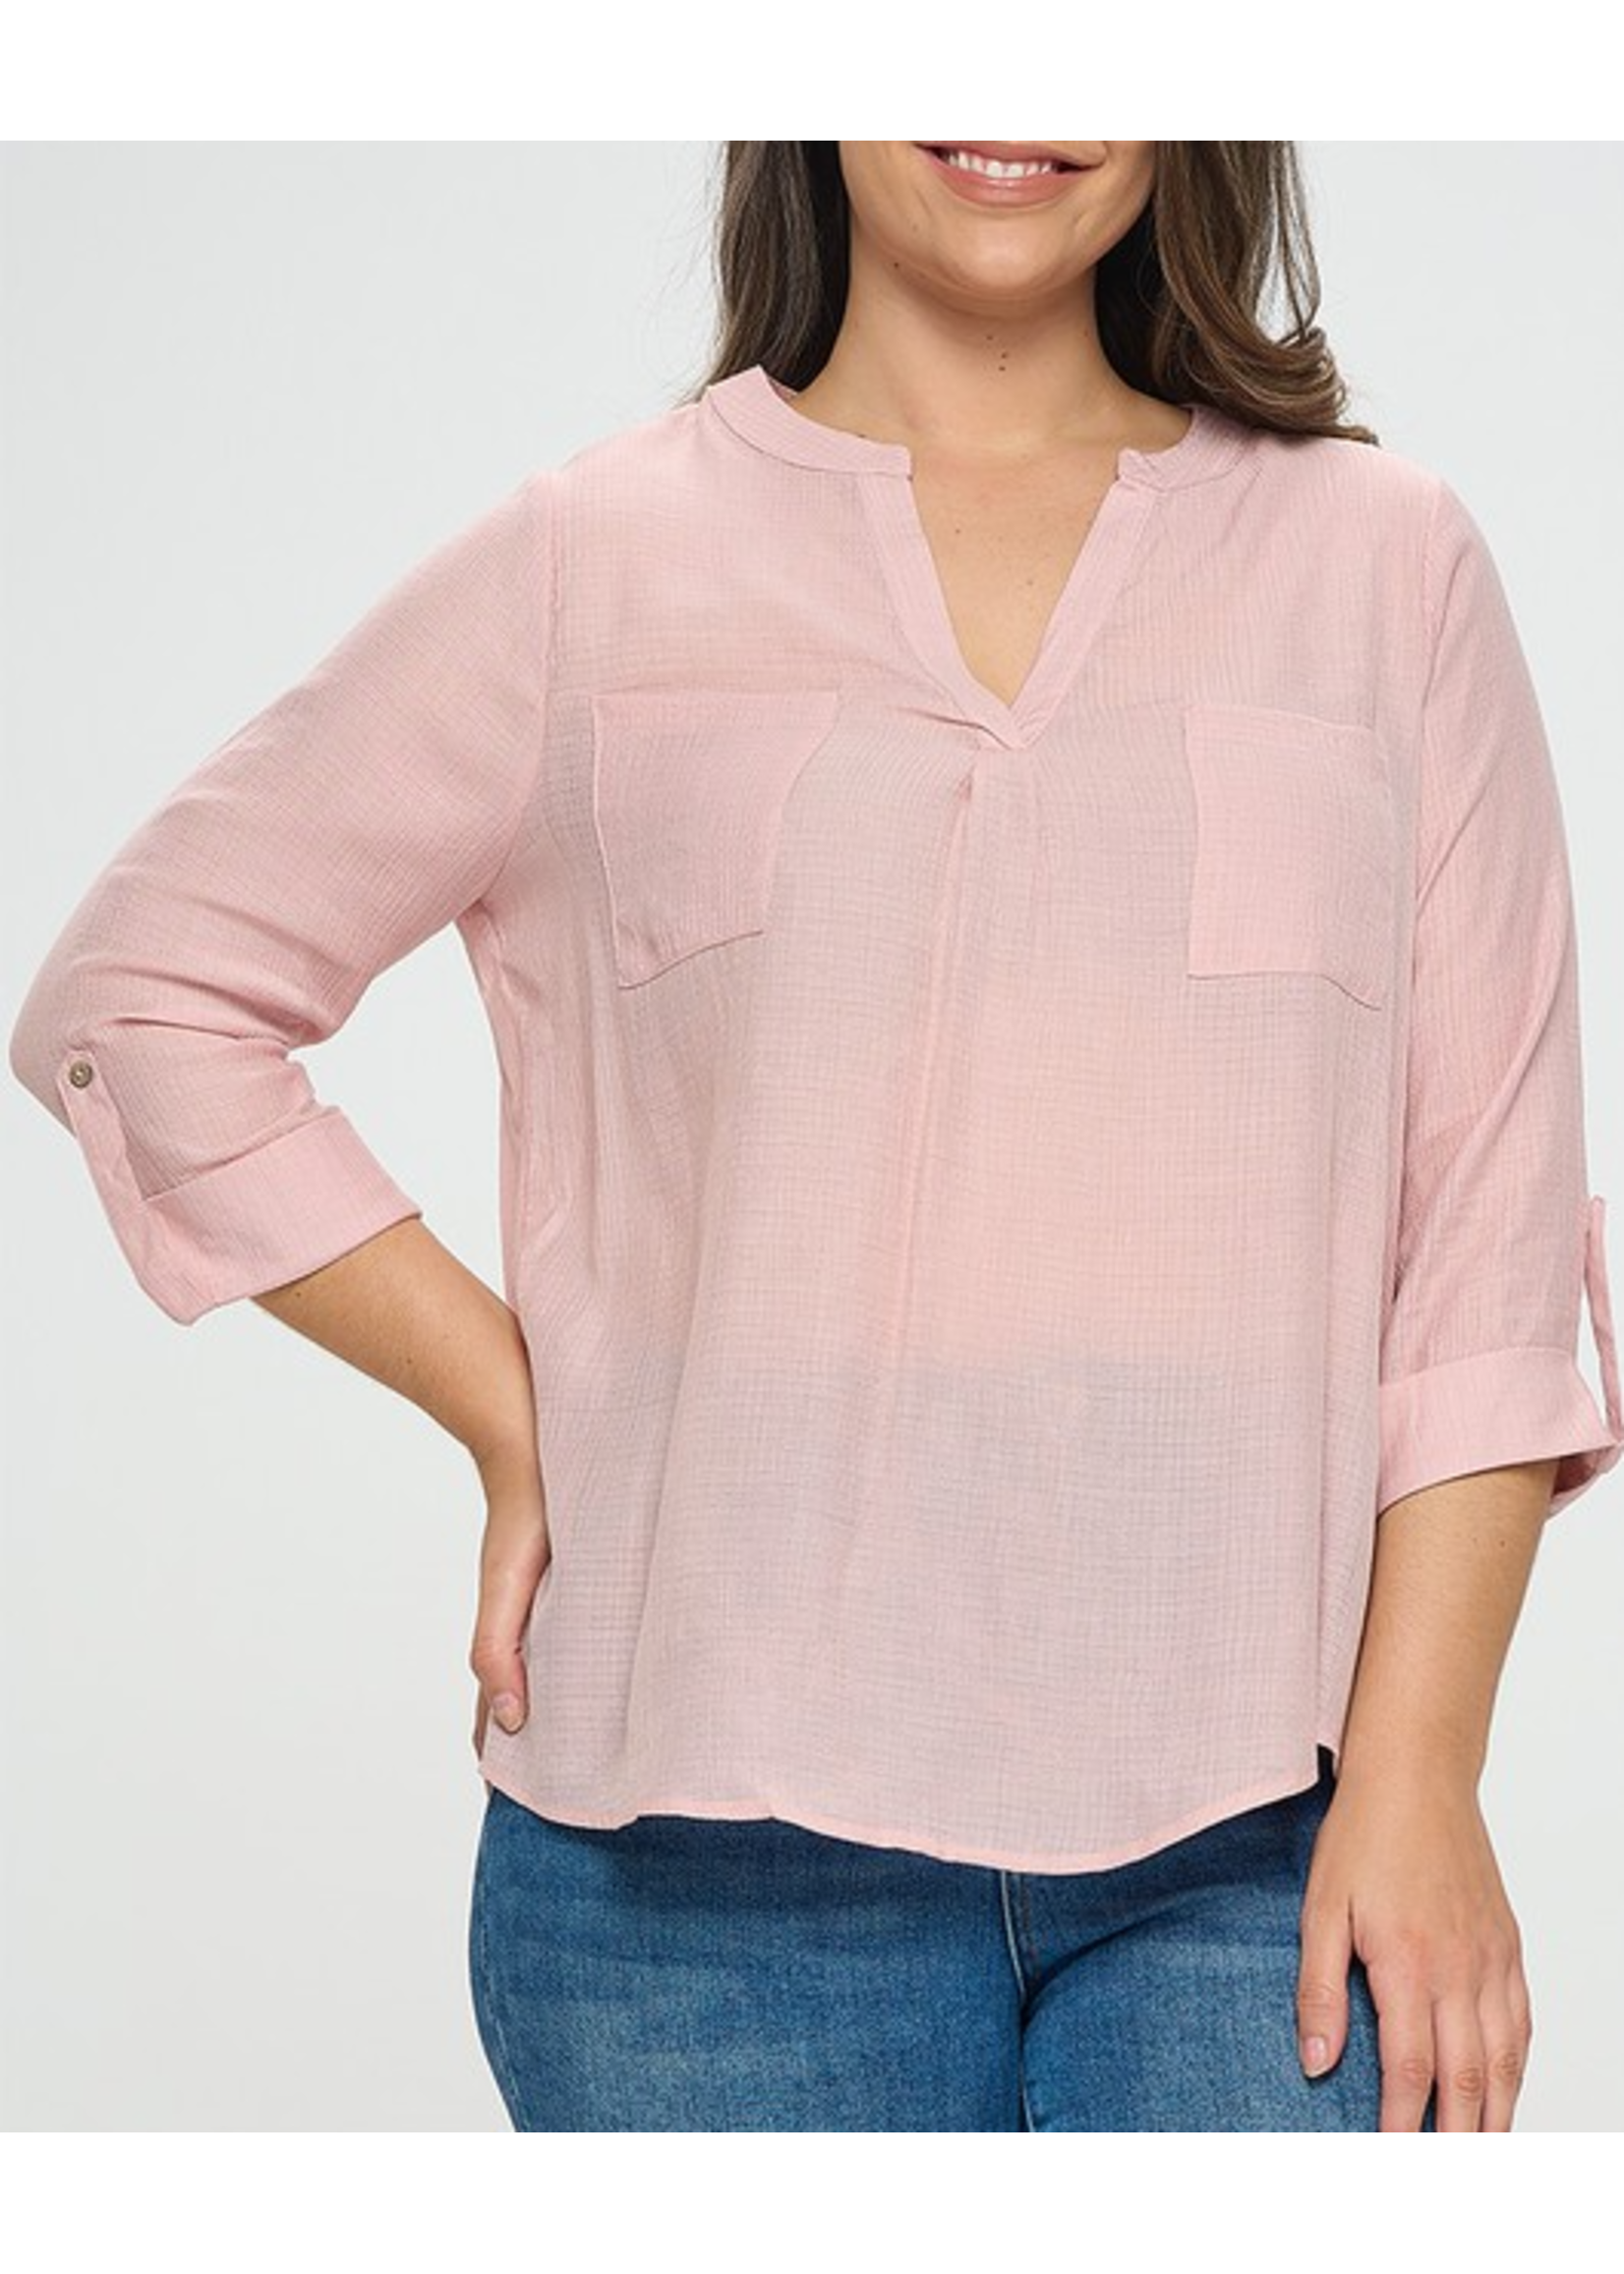 TPIT5469 - PLUS QUARTER SLEEVE RELAXED FIT BLOUSE